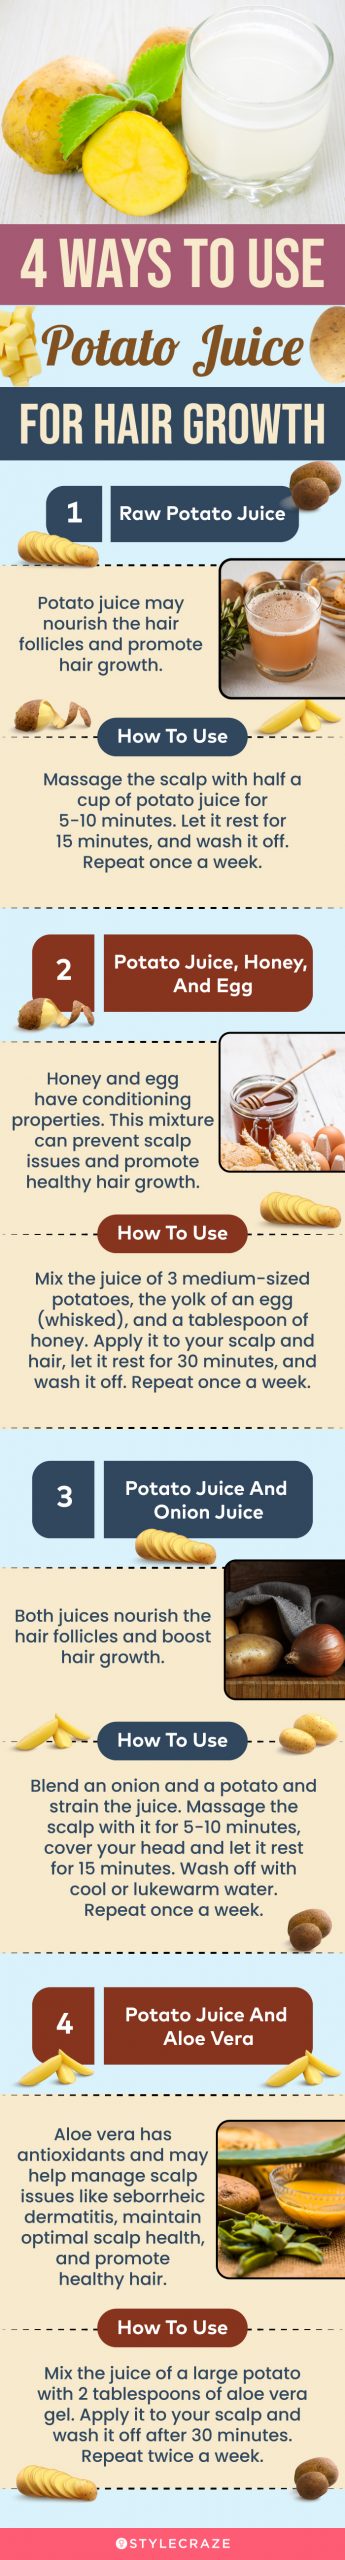 4 ways to use potato juice for hair growth (infographic)